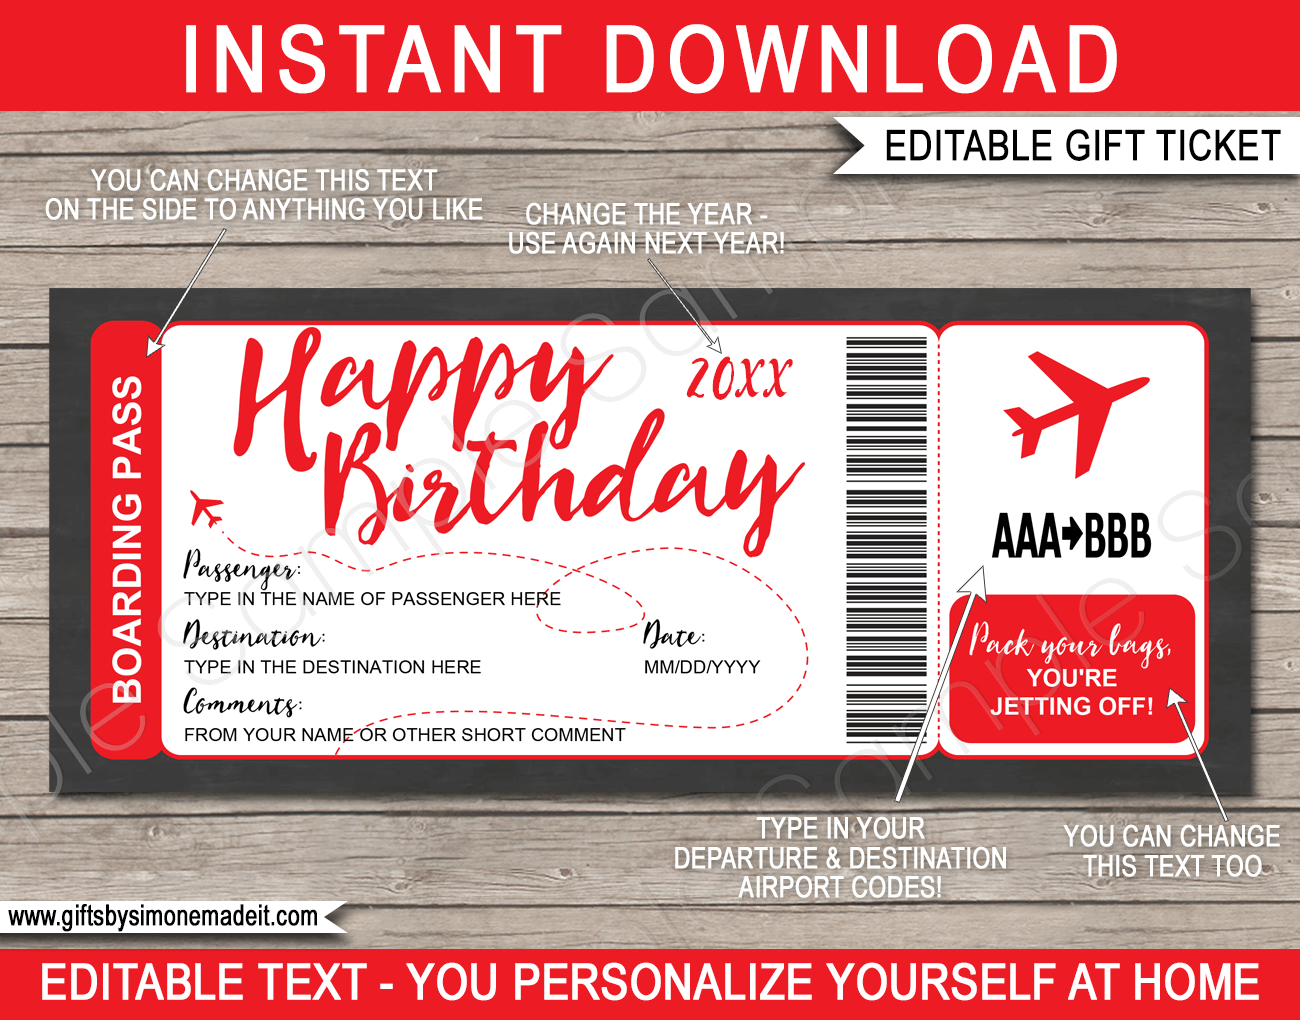 Printable Red Birthday Surprise Trip Boarding Pass Template | Fake Plane Ticket Gift | Surprise Birthday Trip Reveal | Flight, Holiday, Getaway, Vacation | INSTANT DOWNLOAD via giftsbysimonemadeit.com